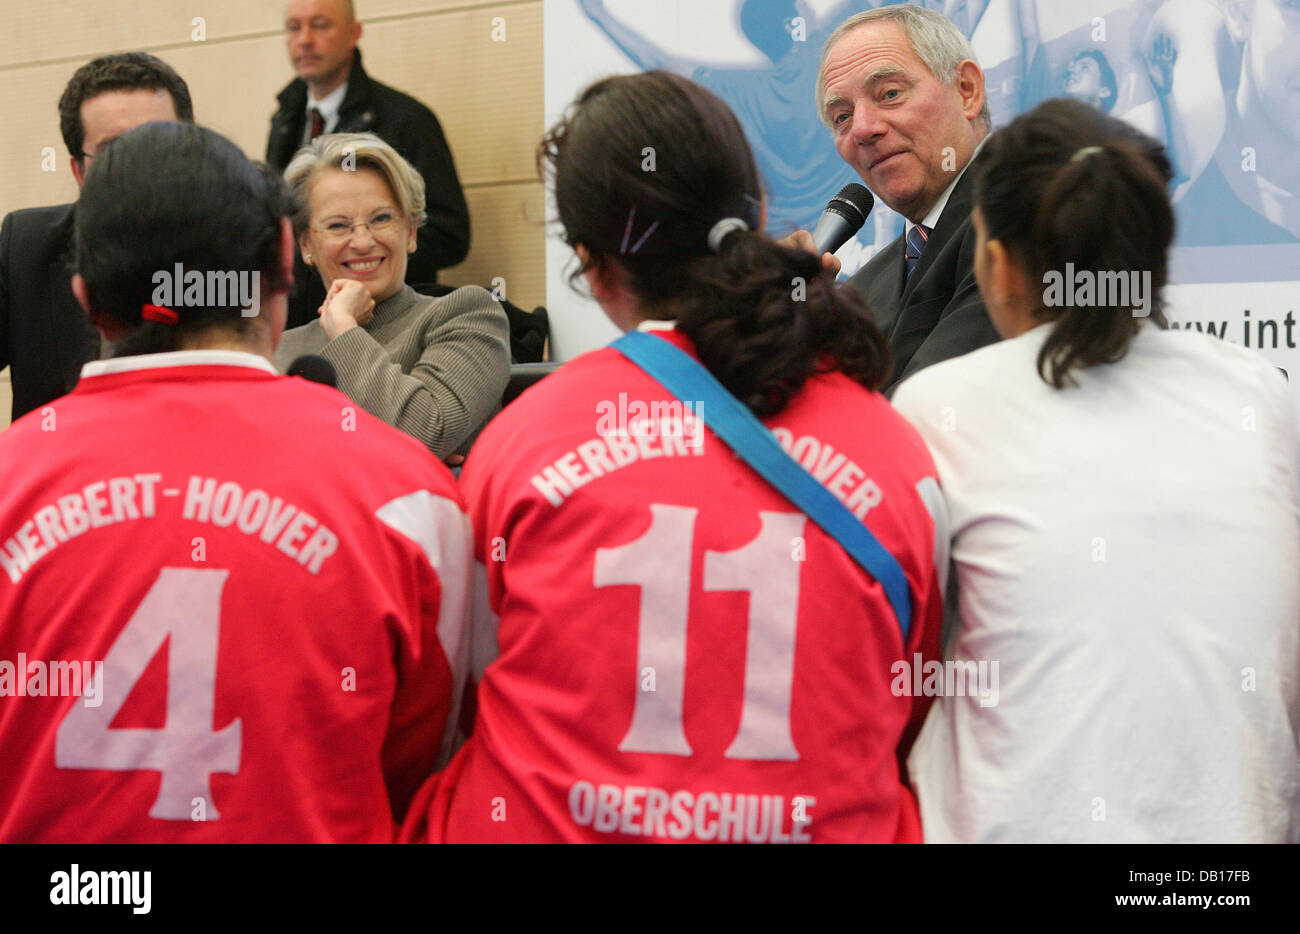 German Minister of the Interior, Wolfgang Schaeuble (R) and his French counterpart Michele Alliot-Marie talk with youths in Berlin, Germany, 12 November 2007. The two visited  'Weddinger Wiesel e.V.' basketball club and the women's soccer club of 'Herbert-Hoover-Oberschule'. The French President and members of the French government arrived in Berlin this Monday for the traditional  Stock Photo